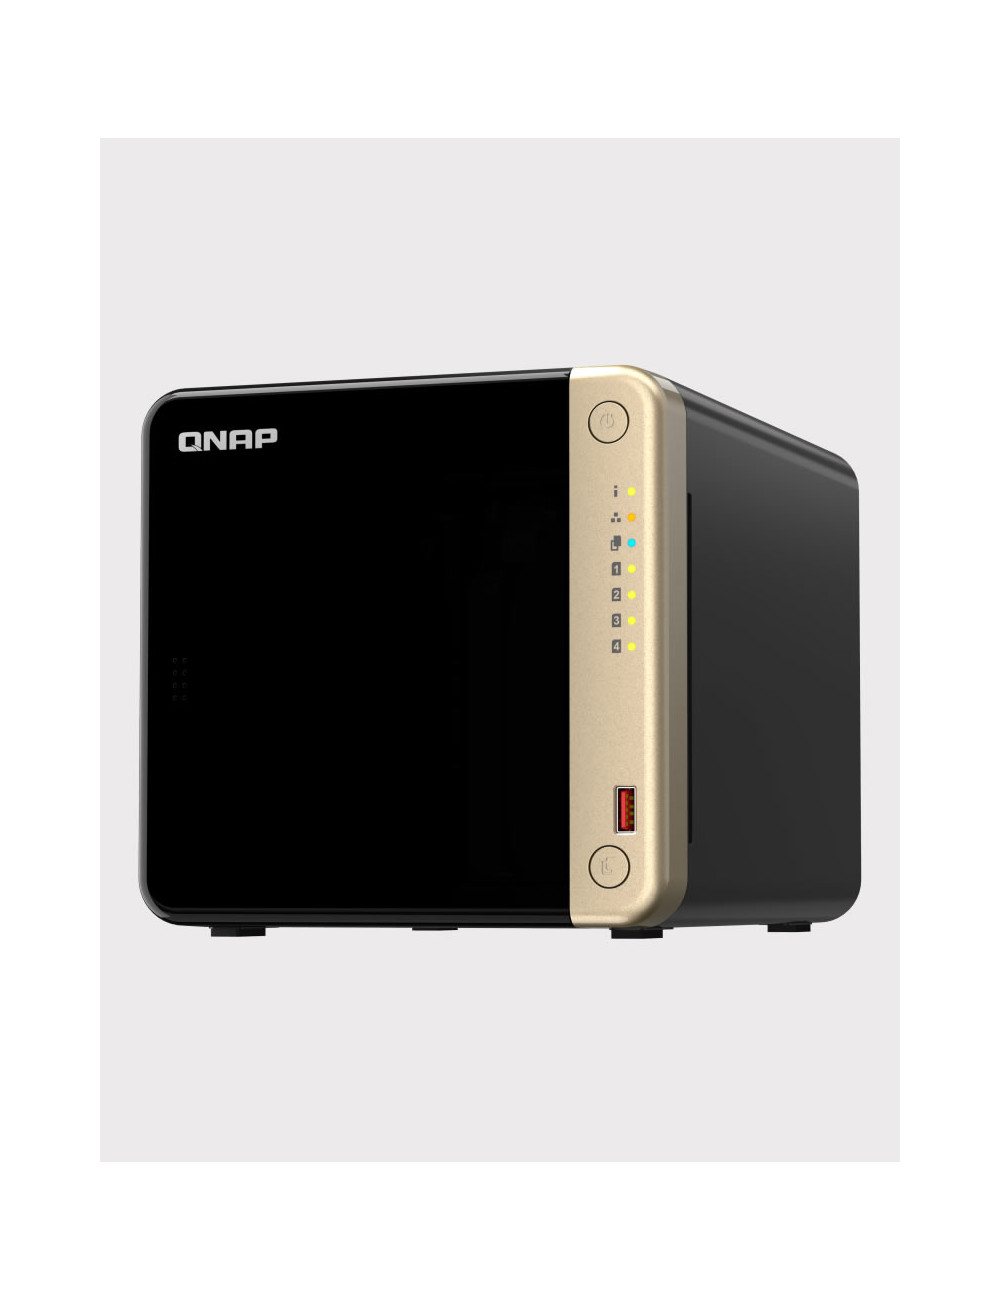 QNAP TS-464 8GB Serveur NAS 4 baies IRONWOLF 32To (4x8To)